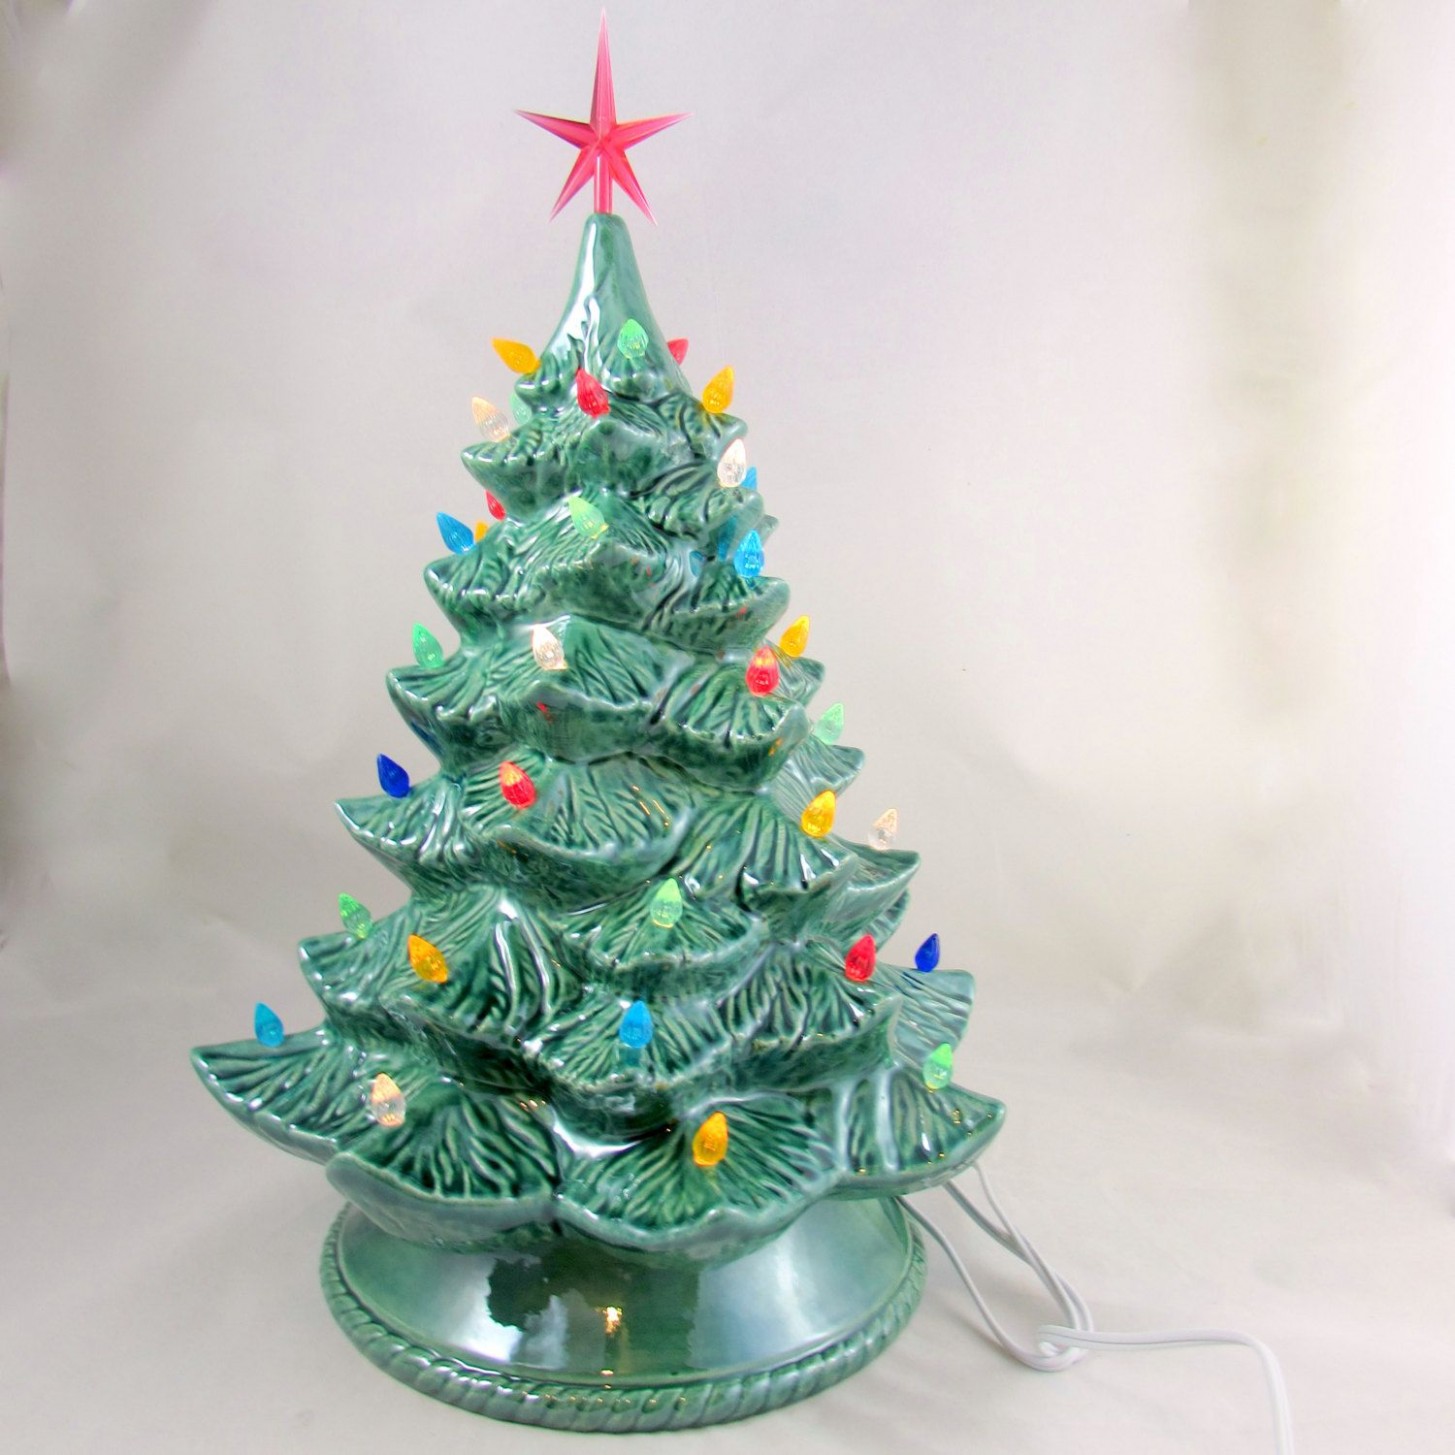 Large Vintage Style Glazed Ceramic Christmas Tree 10 Inches With ..